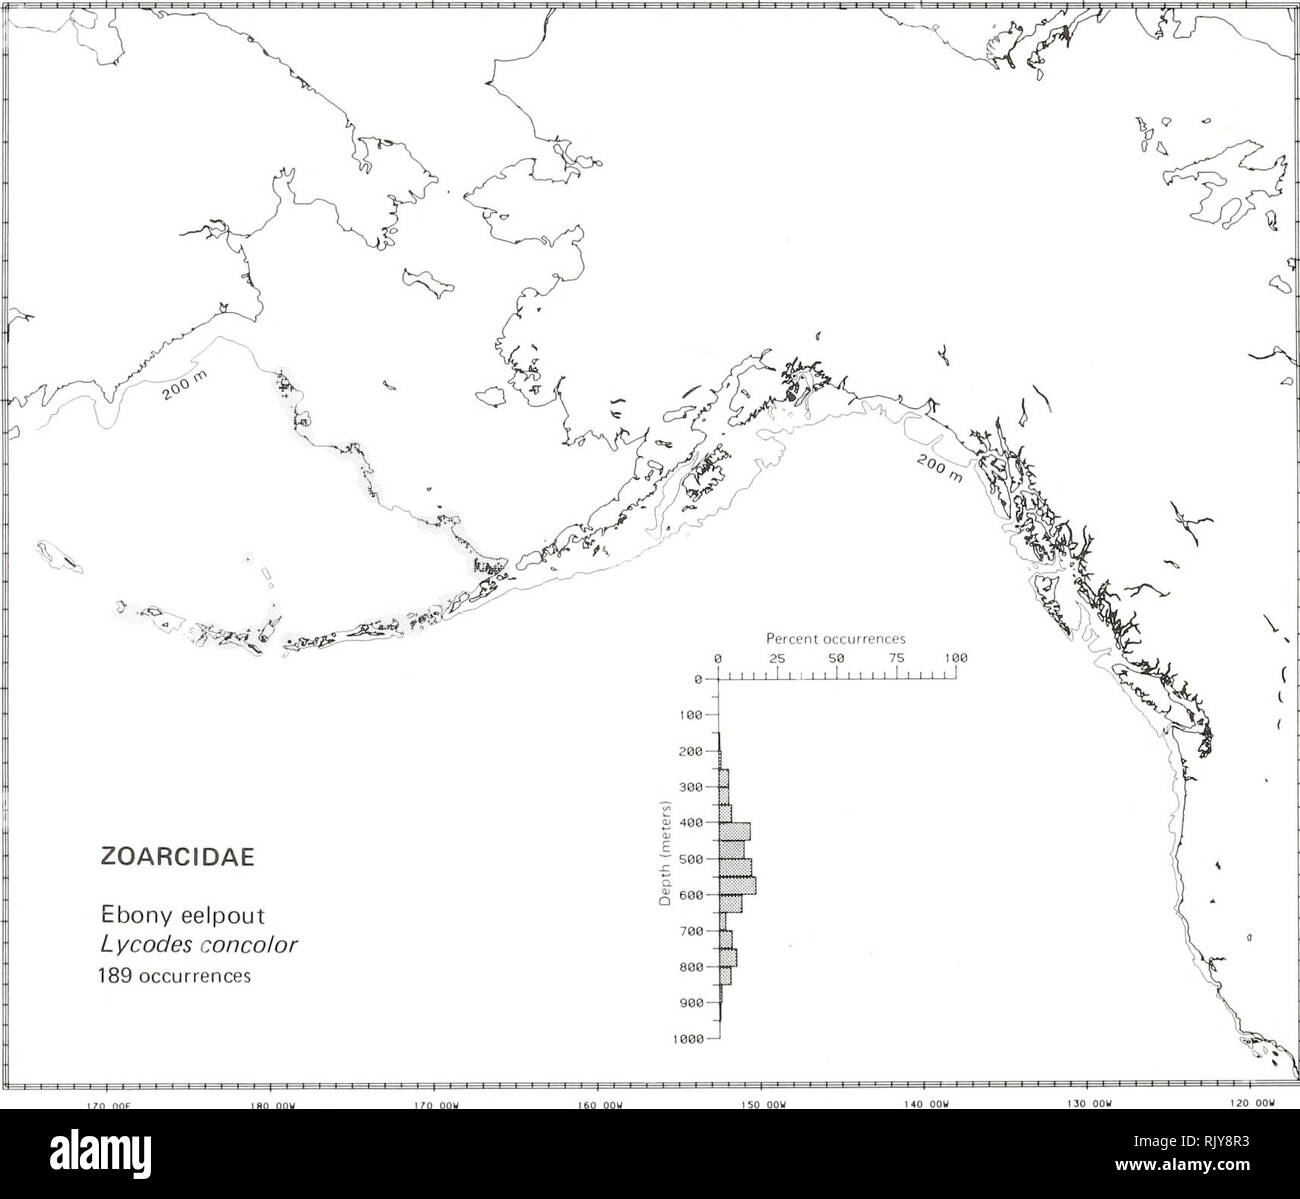 . Atlas and zoogeography of common fishes in the Bering Sea and Northeastern Pacific / M. James Allen, Gary B. Smith. Fishes Bering Sea Geographical distribution.. EBONY EELPOUT, Lycodes concolor Gill and Townsend 1897 Zoarcidae: Eelpouts Taxonomic comment The ebony eelpout, Lycodes concolor, as construed by E. M. Anderson (Dep. Ichthyol., Calif. Acad. Sci., San Francisco, CA 94118, pers. commun. April 1984), includes both L. andriashevi Fedorov 1966 and L. soldatovi Taranets and Andriyashev 1935 as junior synonyms. All records of the species in this survey were identified in the field as L. s Stock Photo